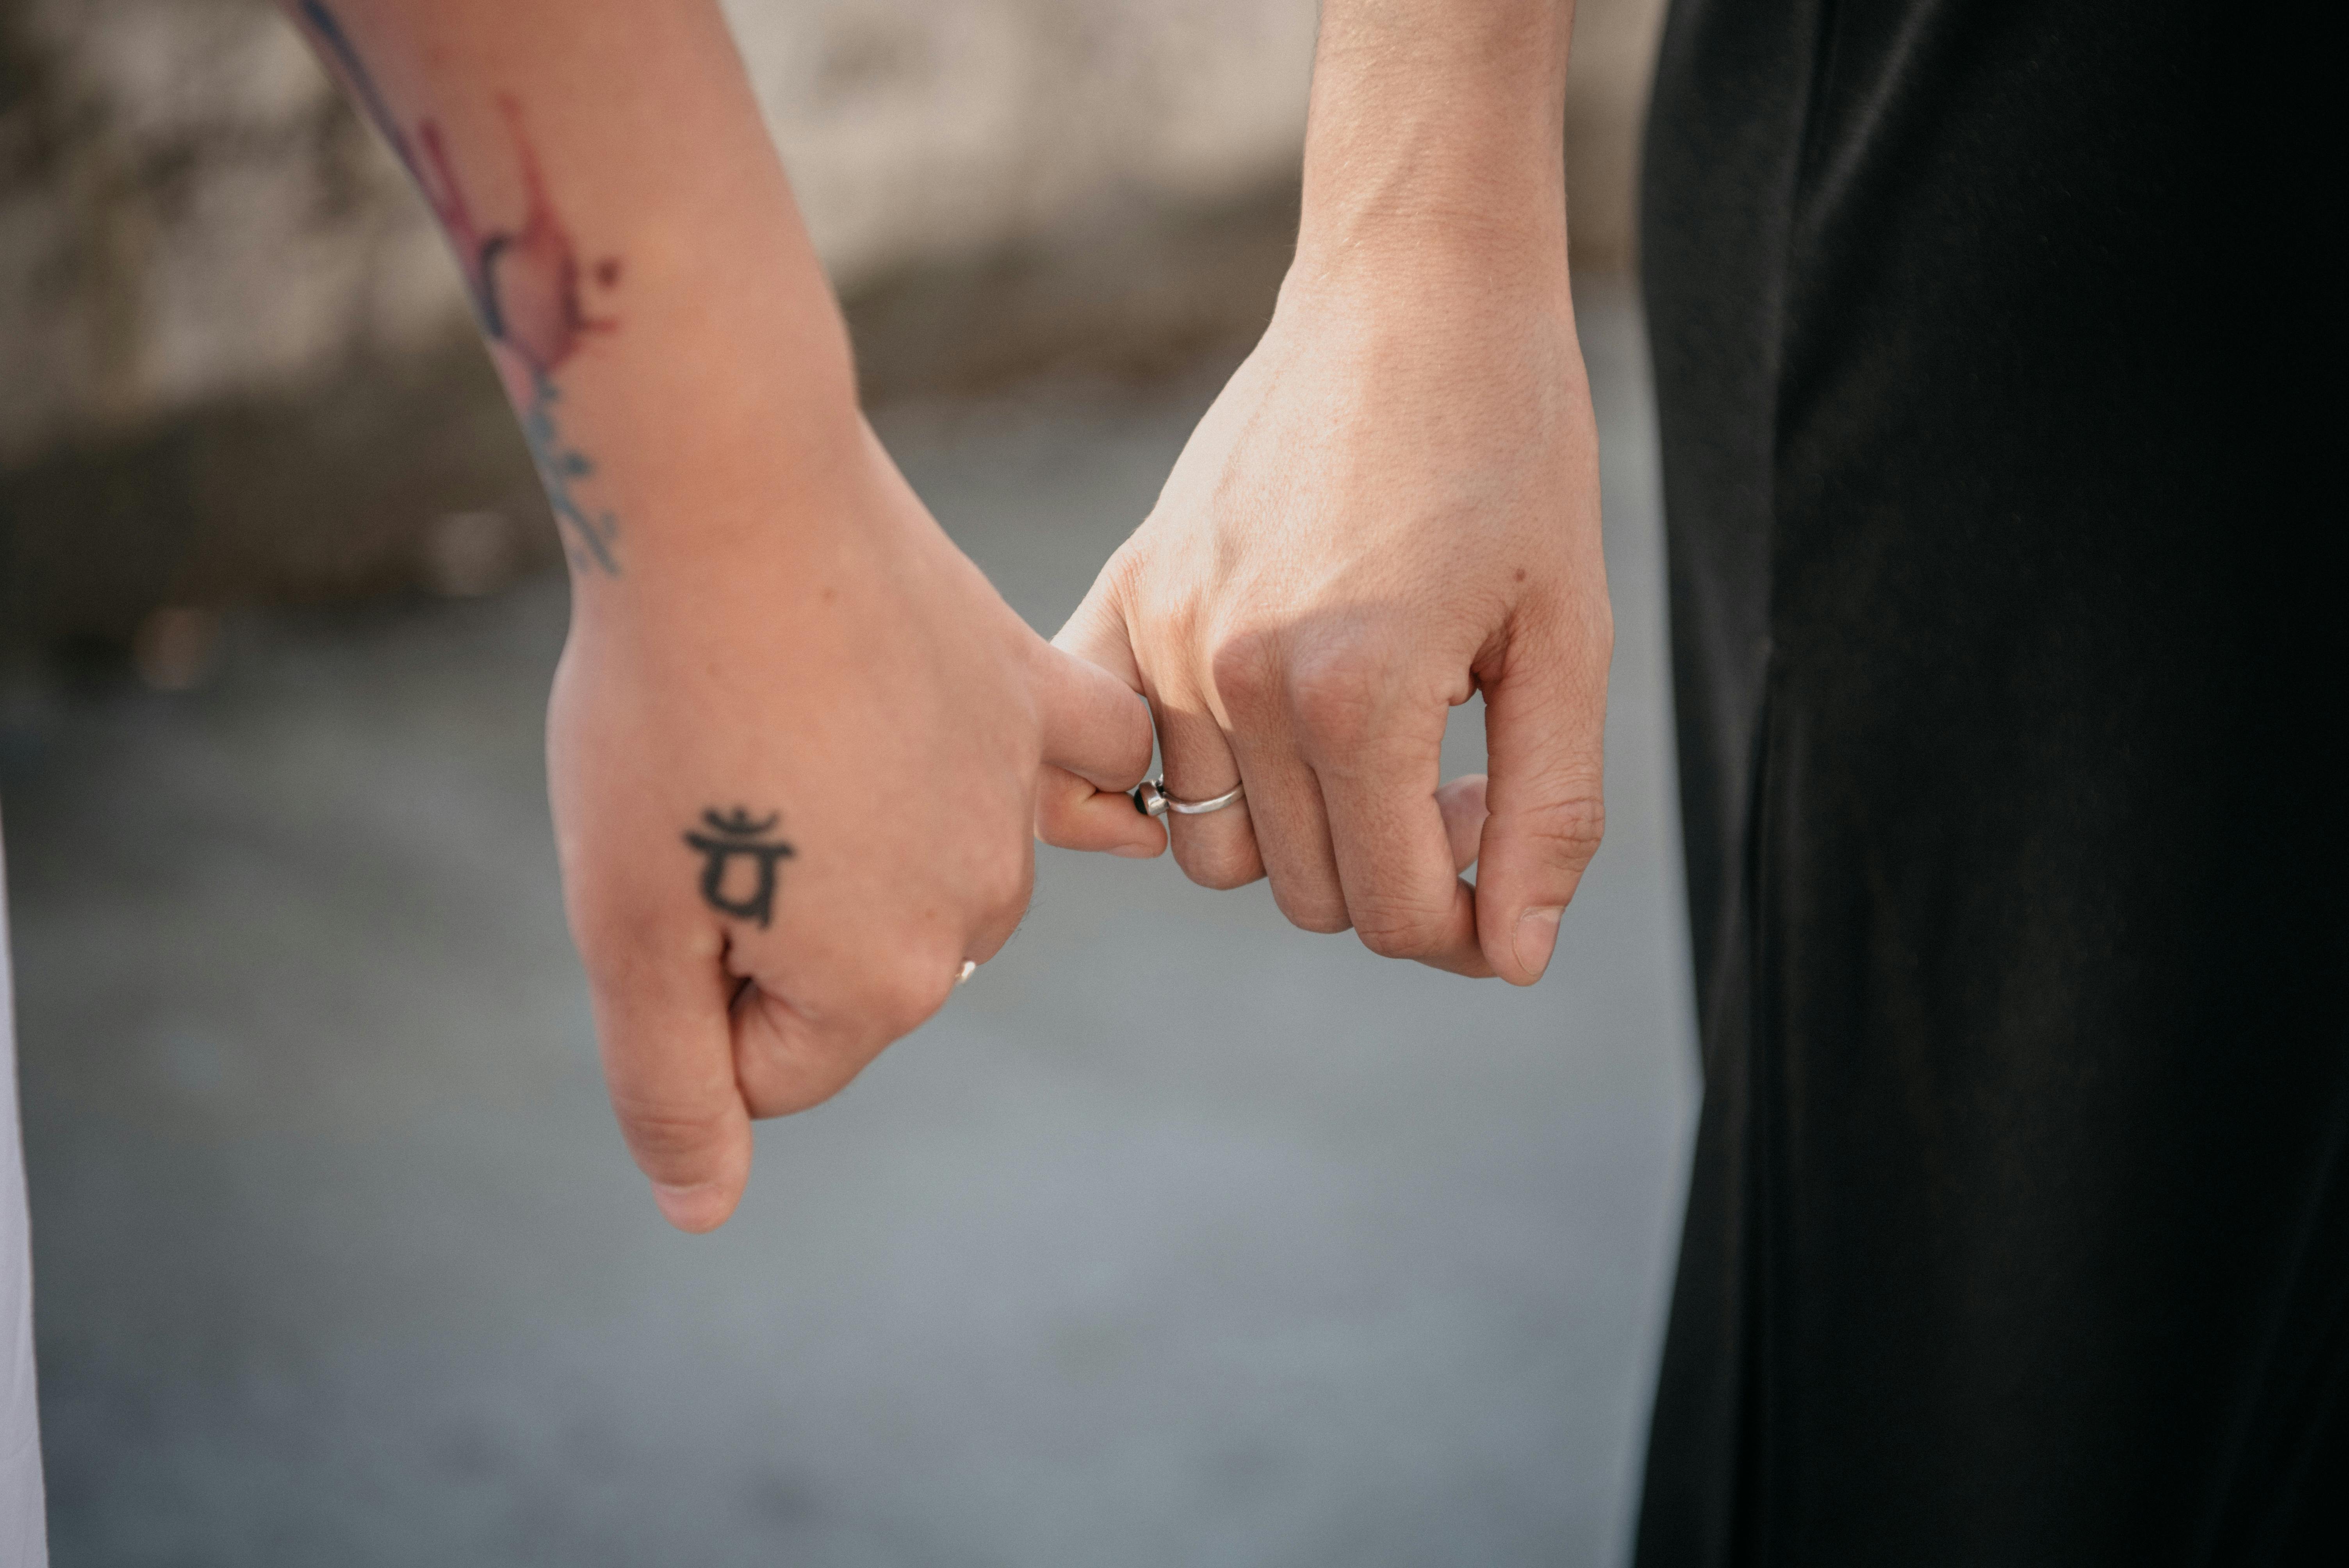 matching anchor tattoos for a couple. | Matching couple tattoos, Anchor  tattoos, Matching tattoos